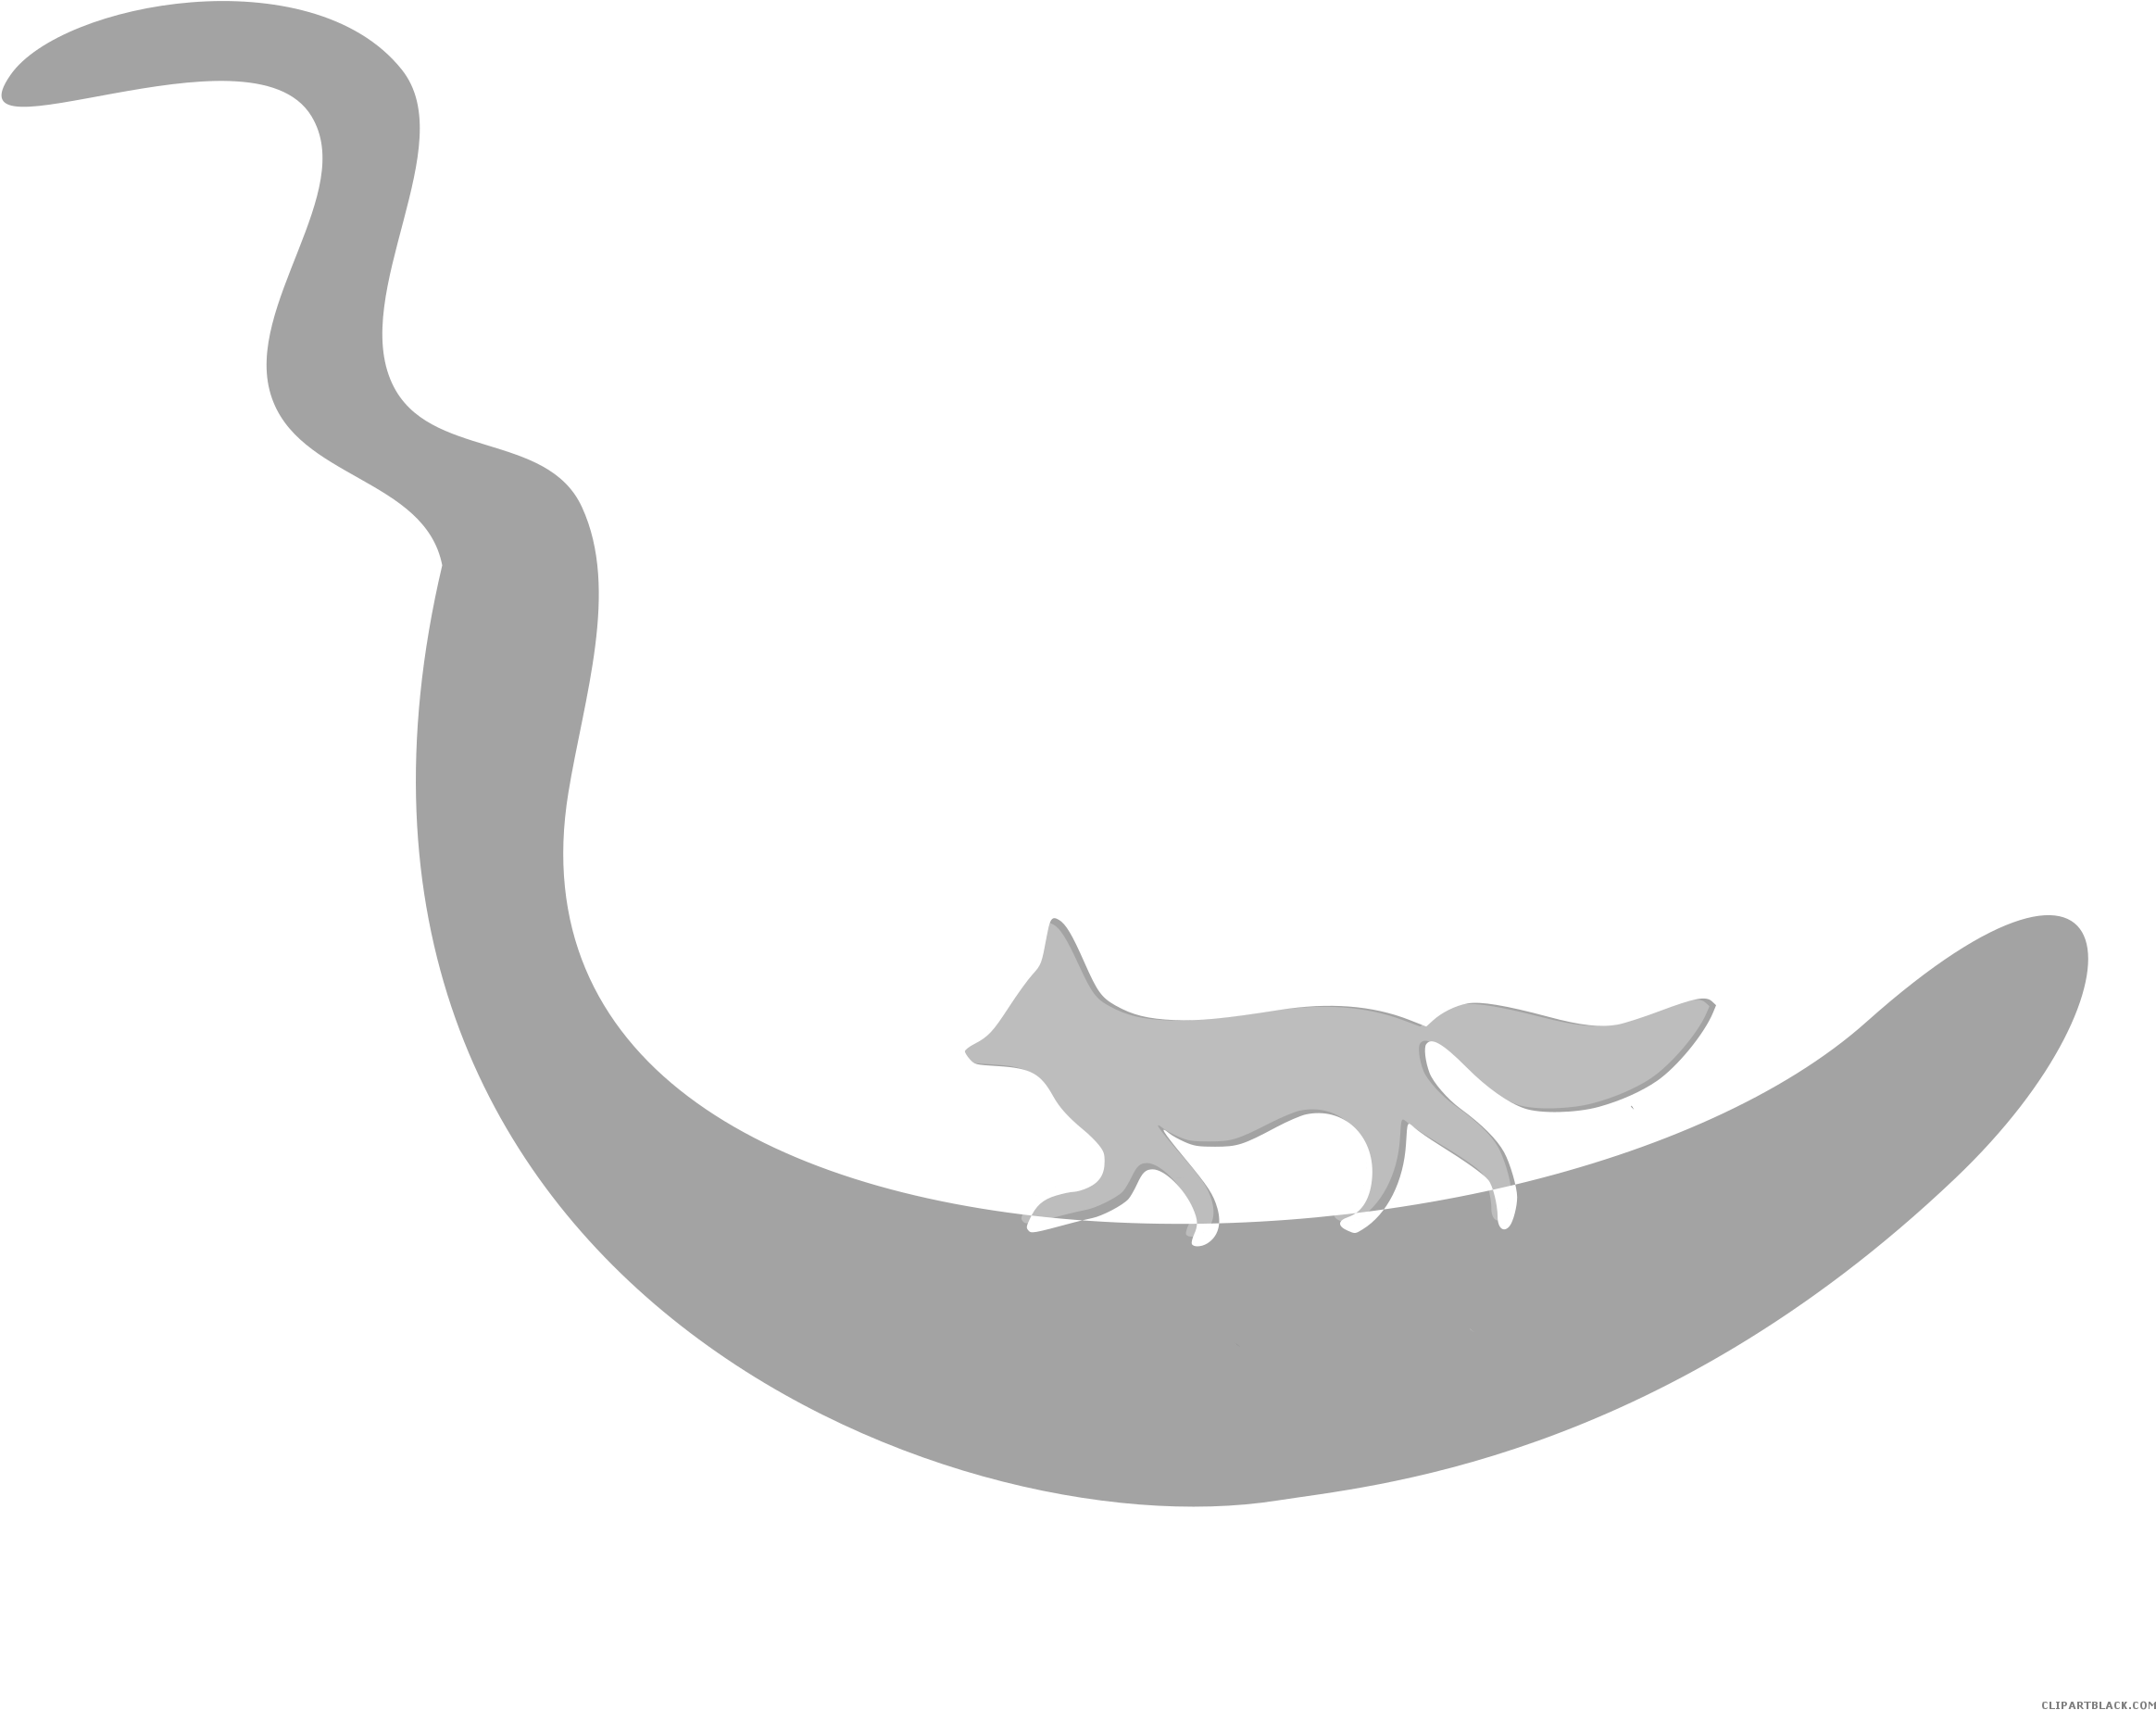 Fox Silhouette Animal Free Black White Clipart Images - Portable Network Graphics (2400x2000)